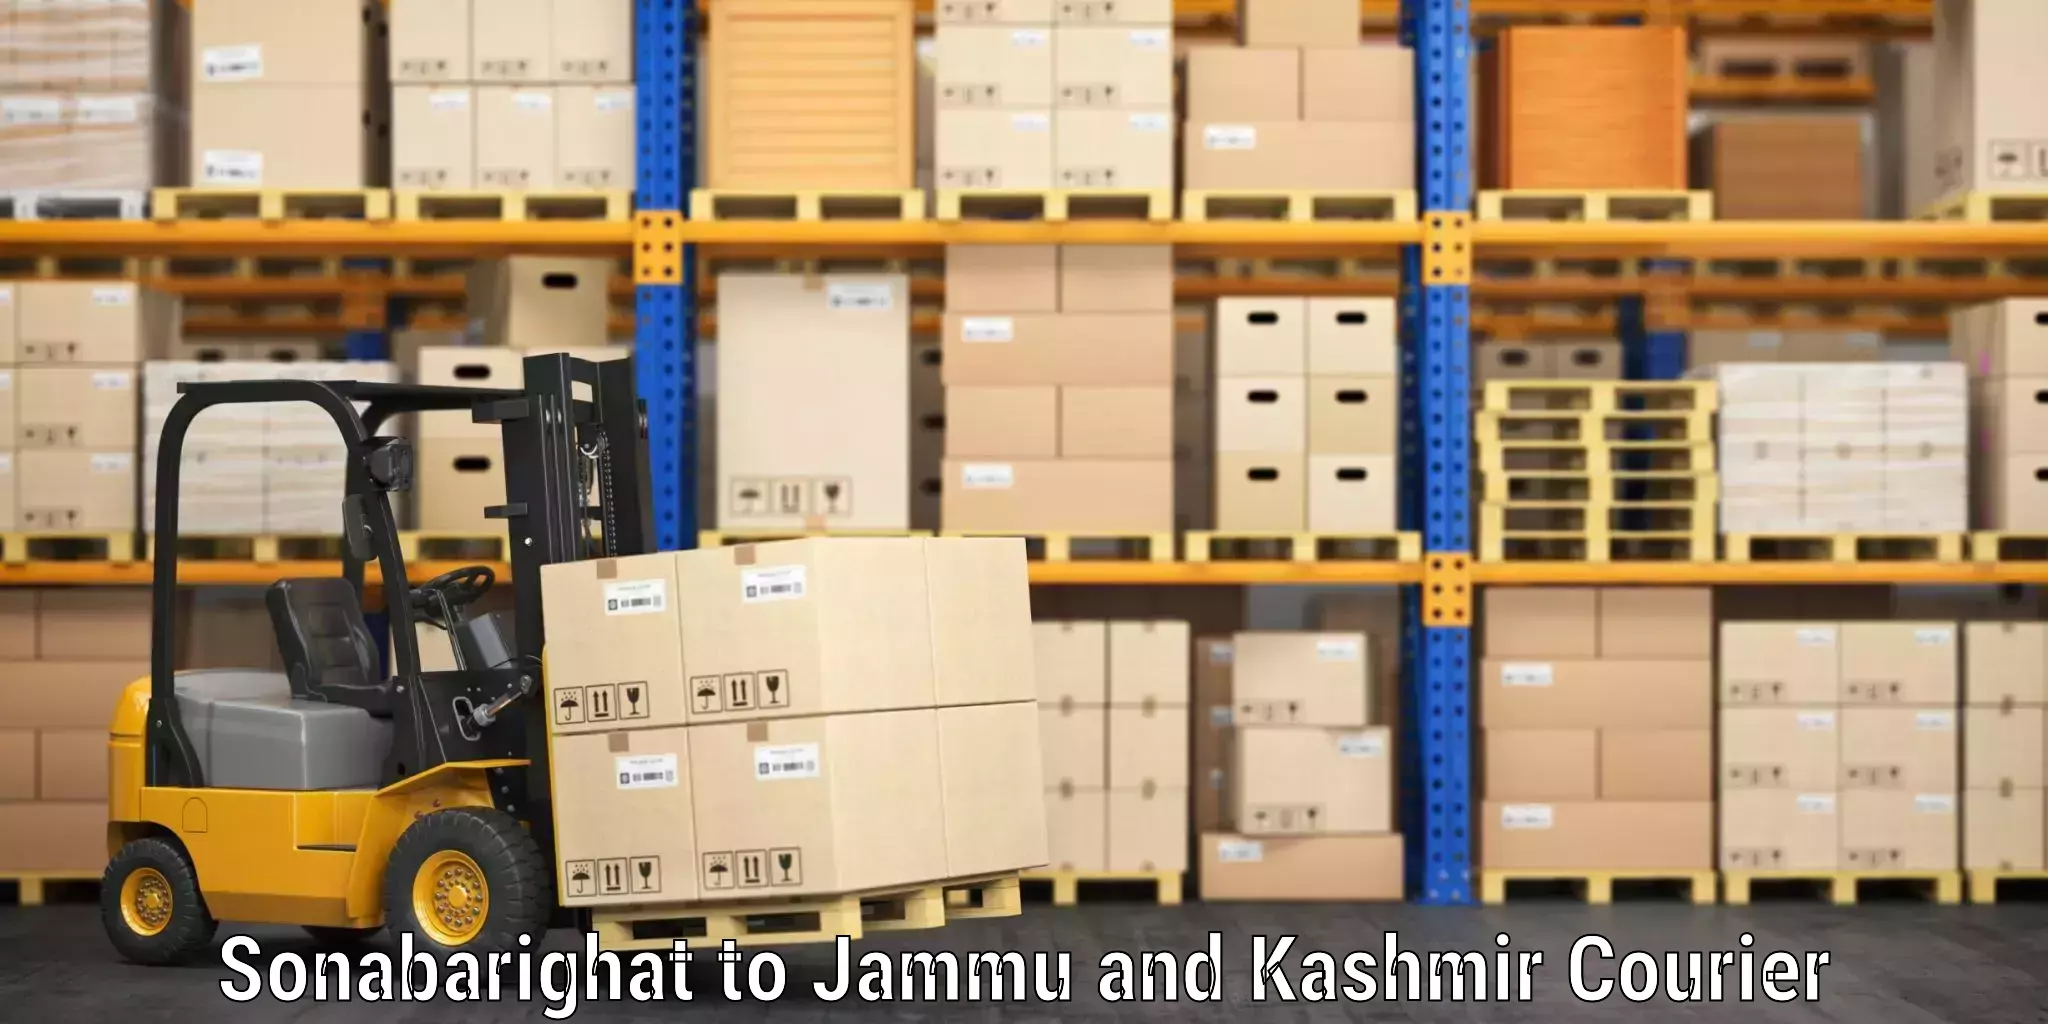 Baggage transport technology Sonabarighat to Jammu and Kashmir